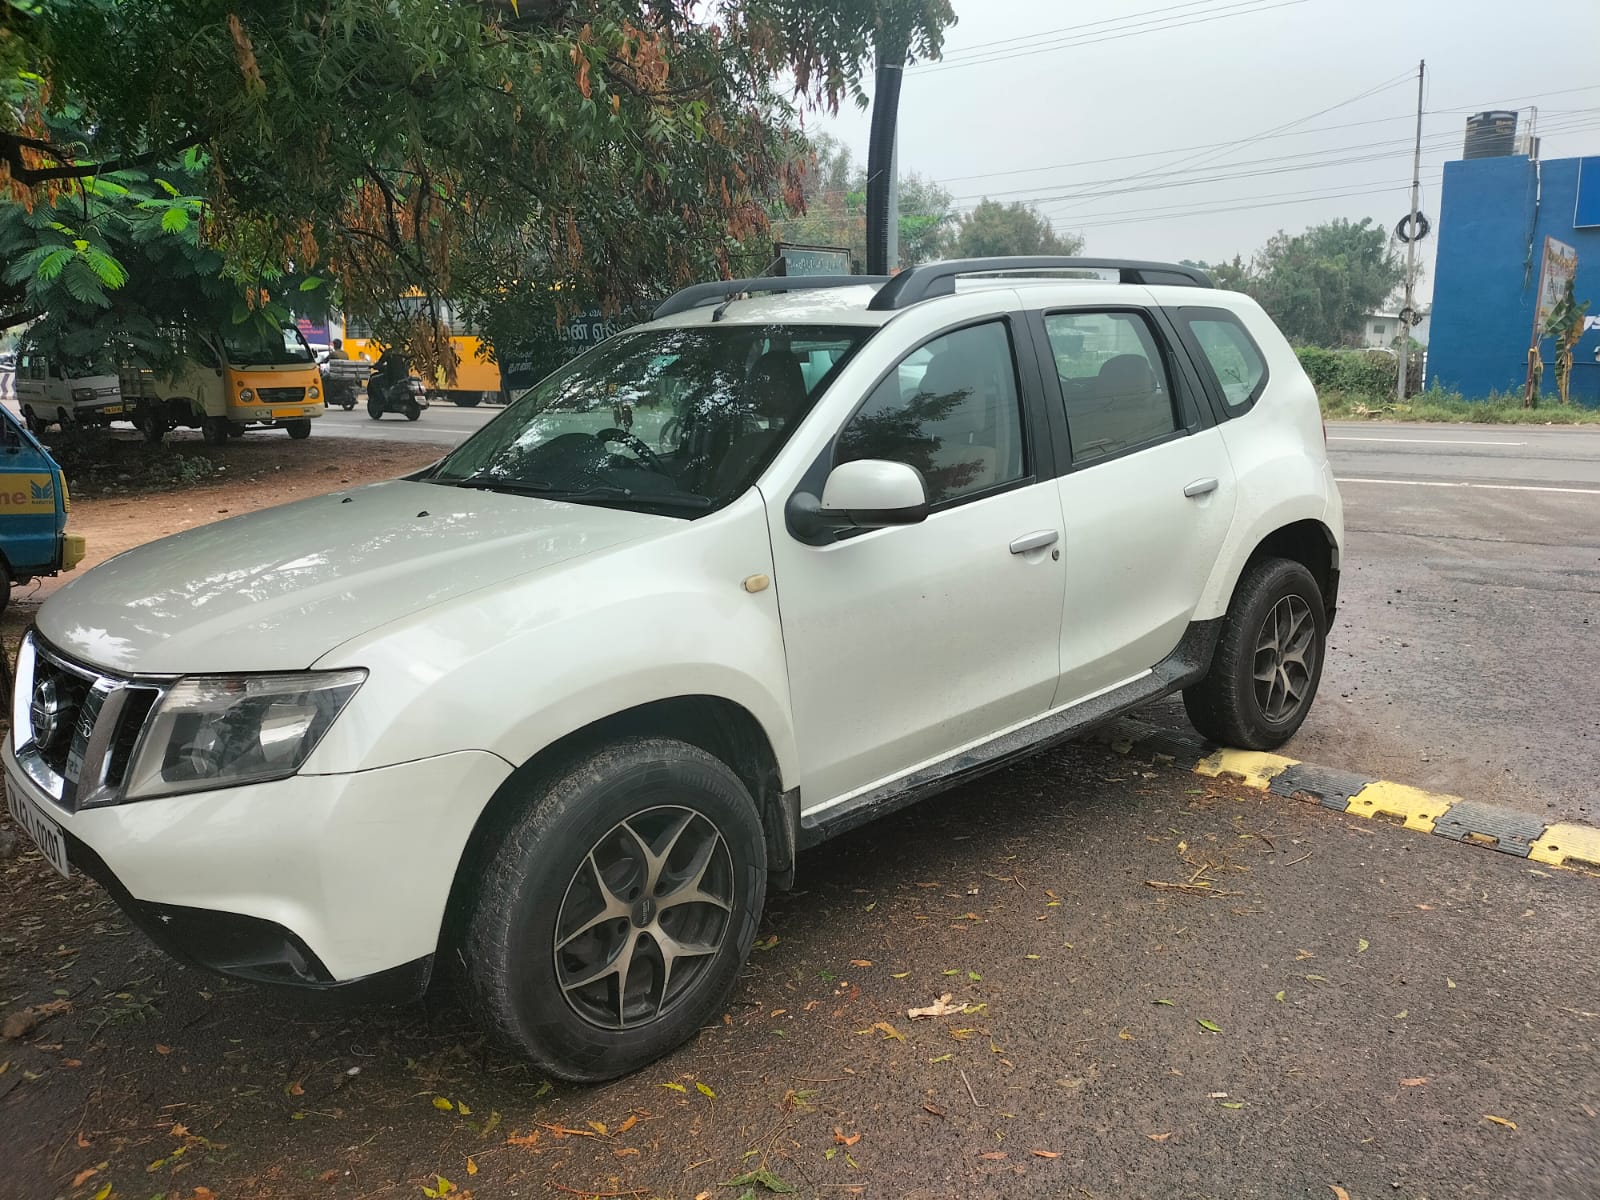 4690-for-sale-Renault-Duster-Diesel-First-Owner-2014-TN-registered-rs-550000